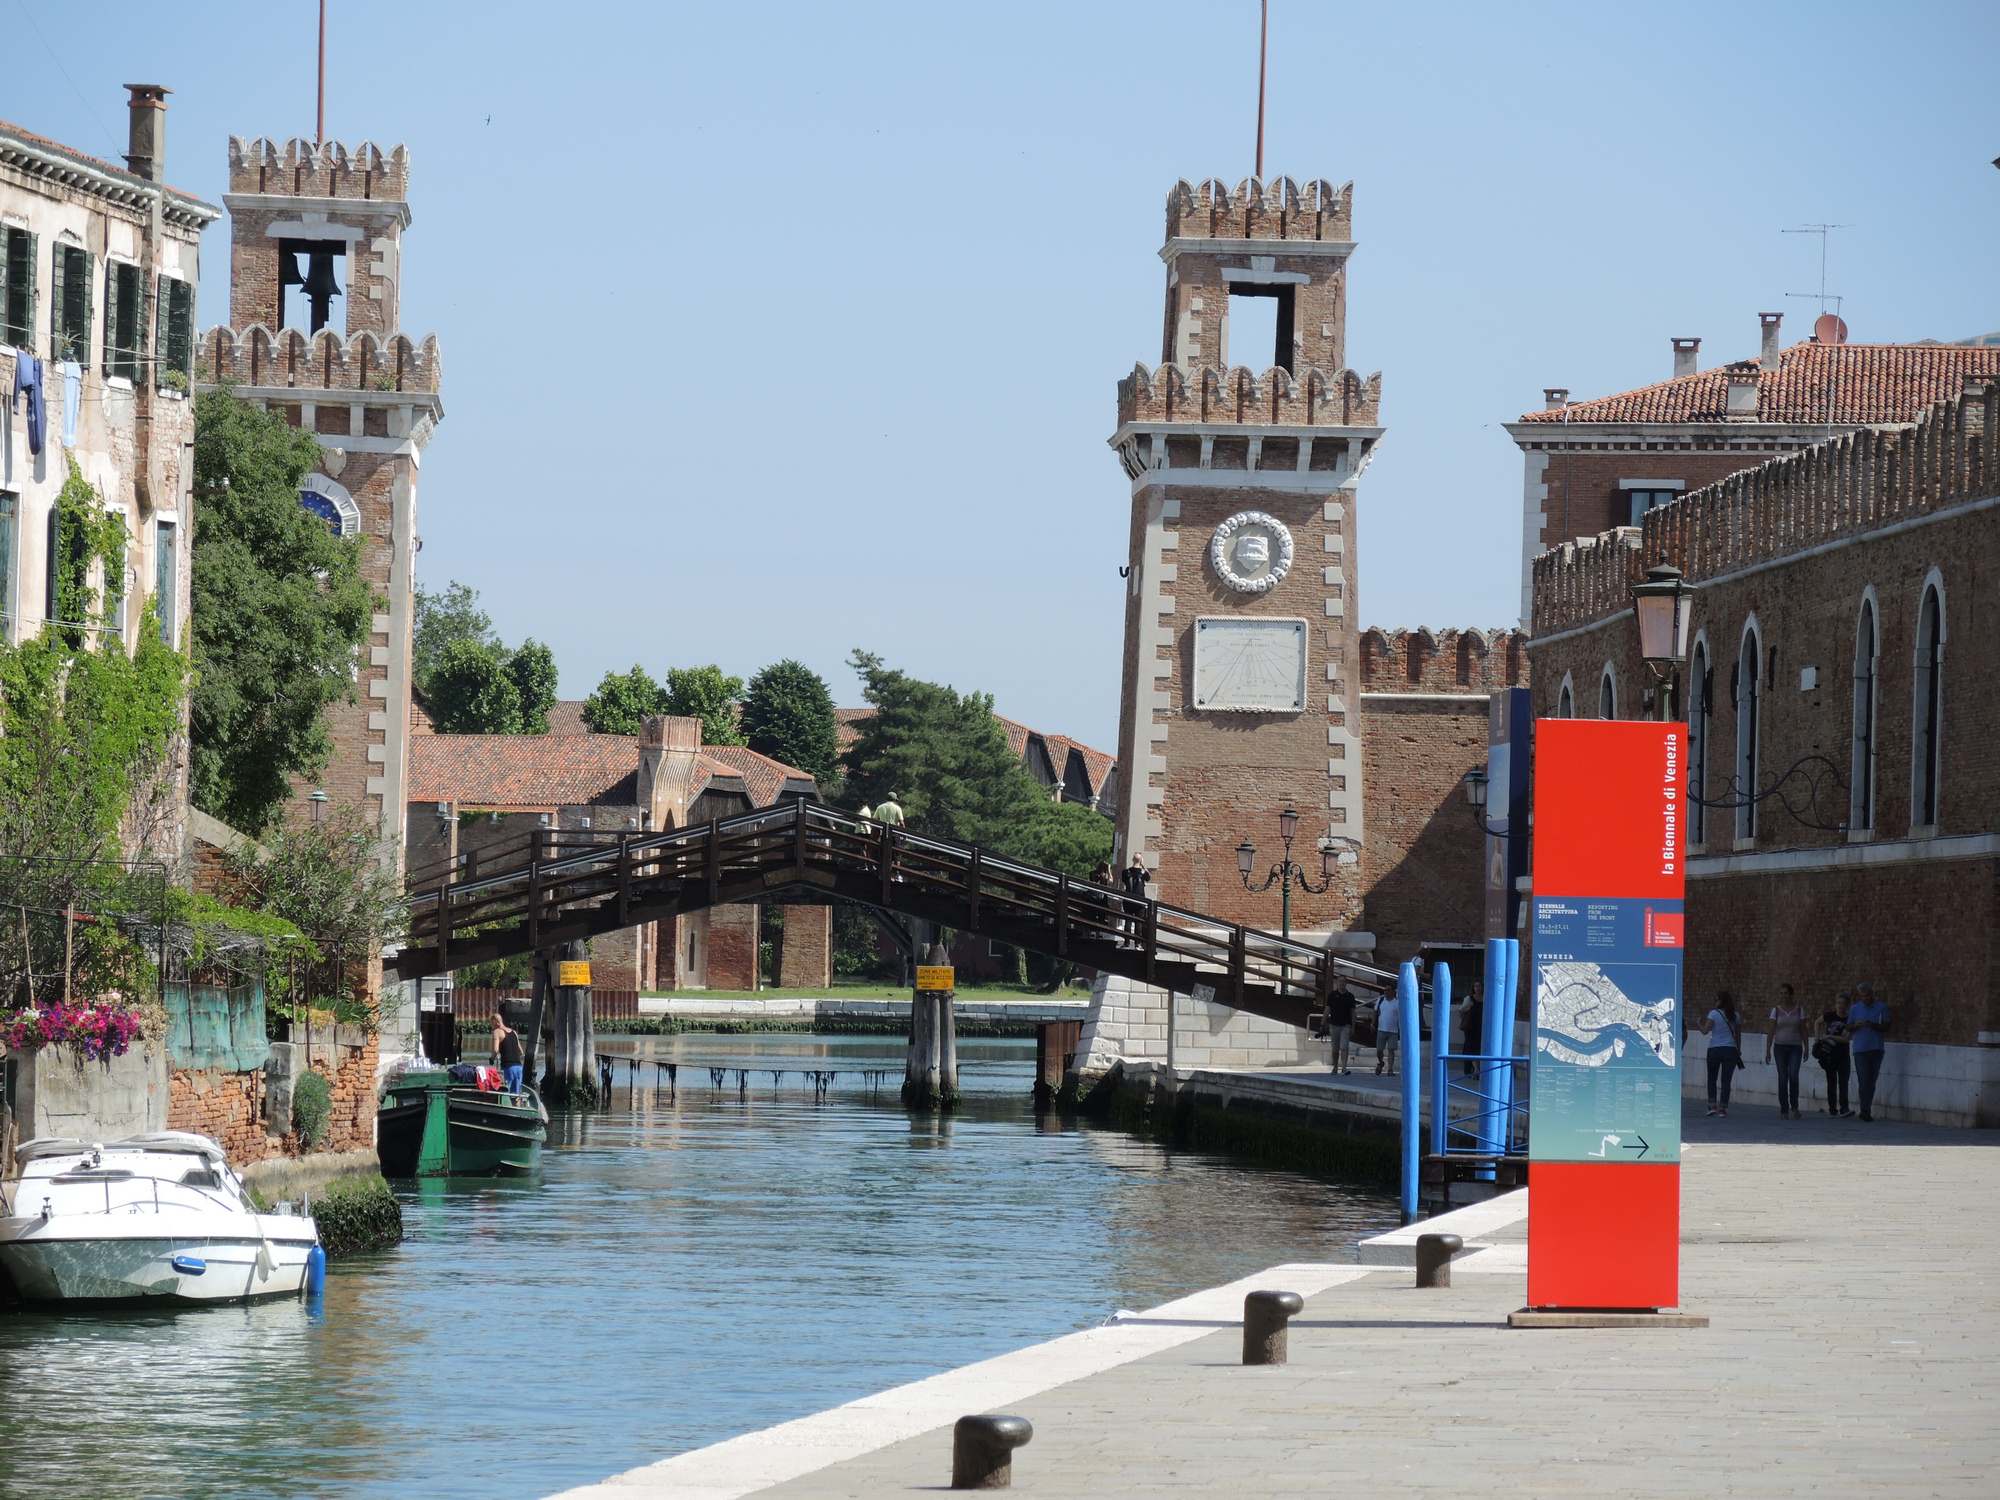 Sign to the Biennale - Arsenale